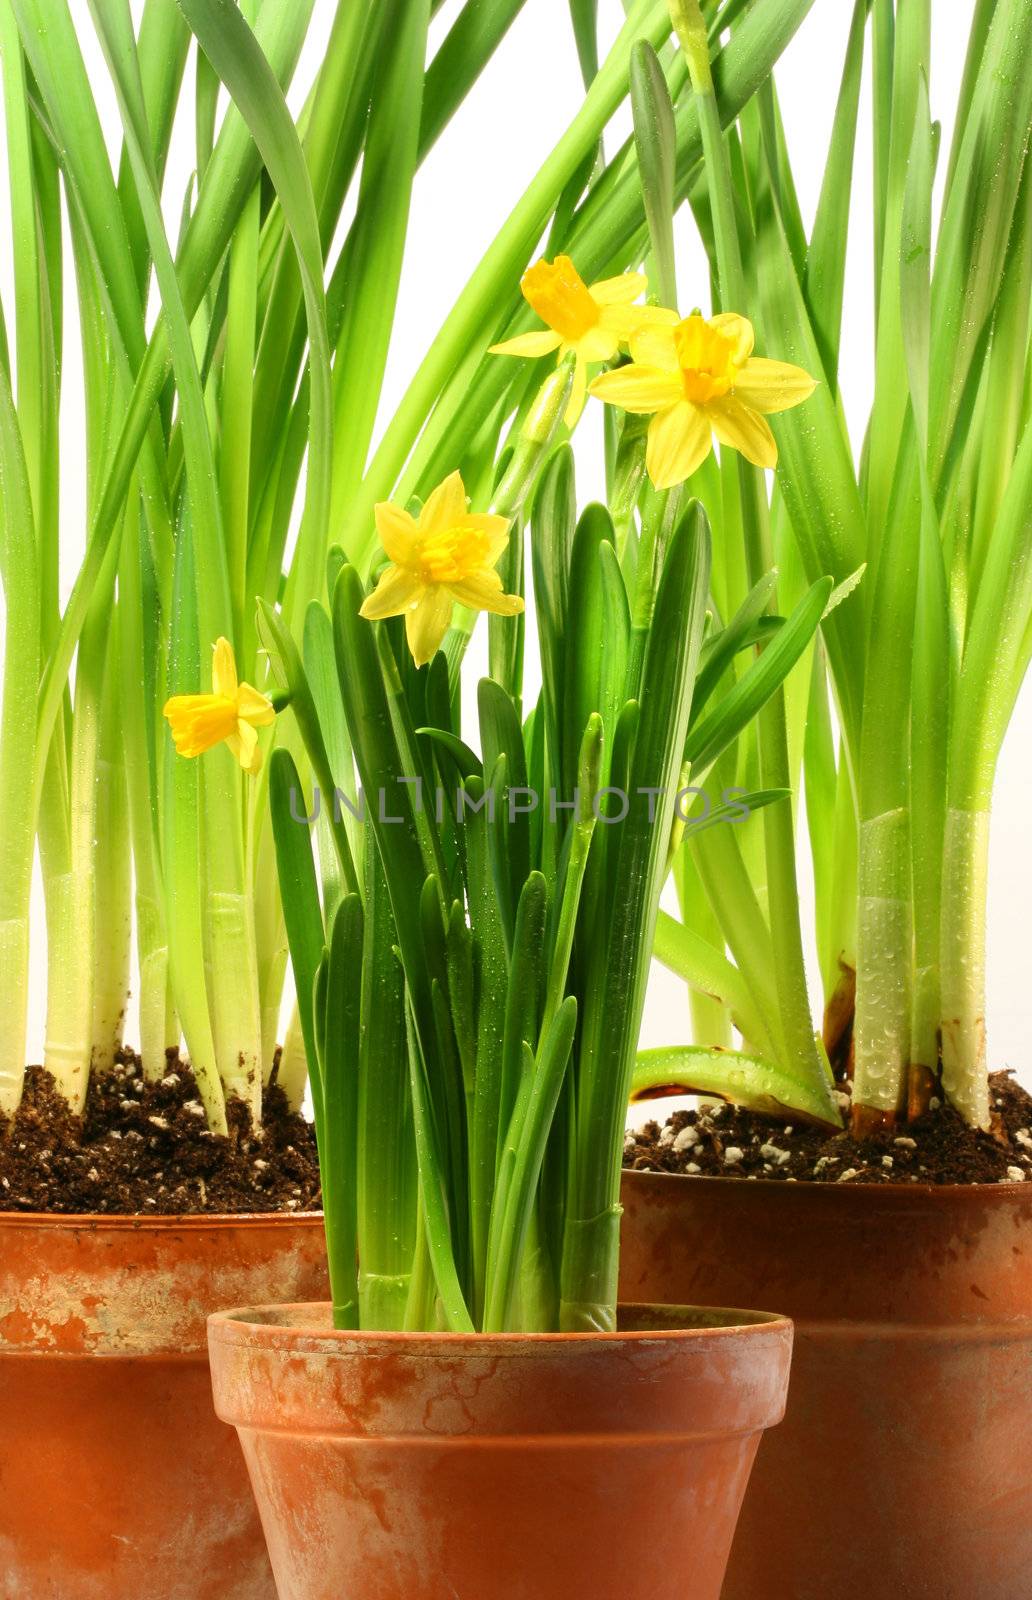 Three pots of daffodils on white  by Sandralise